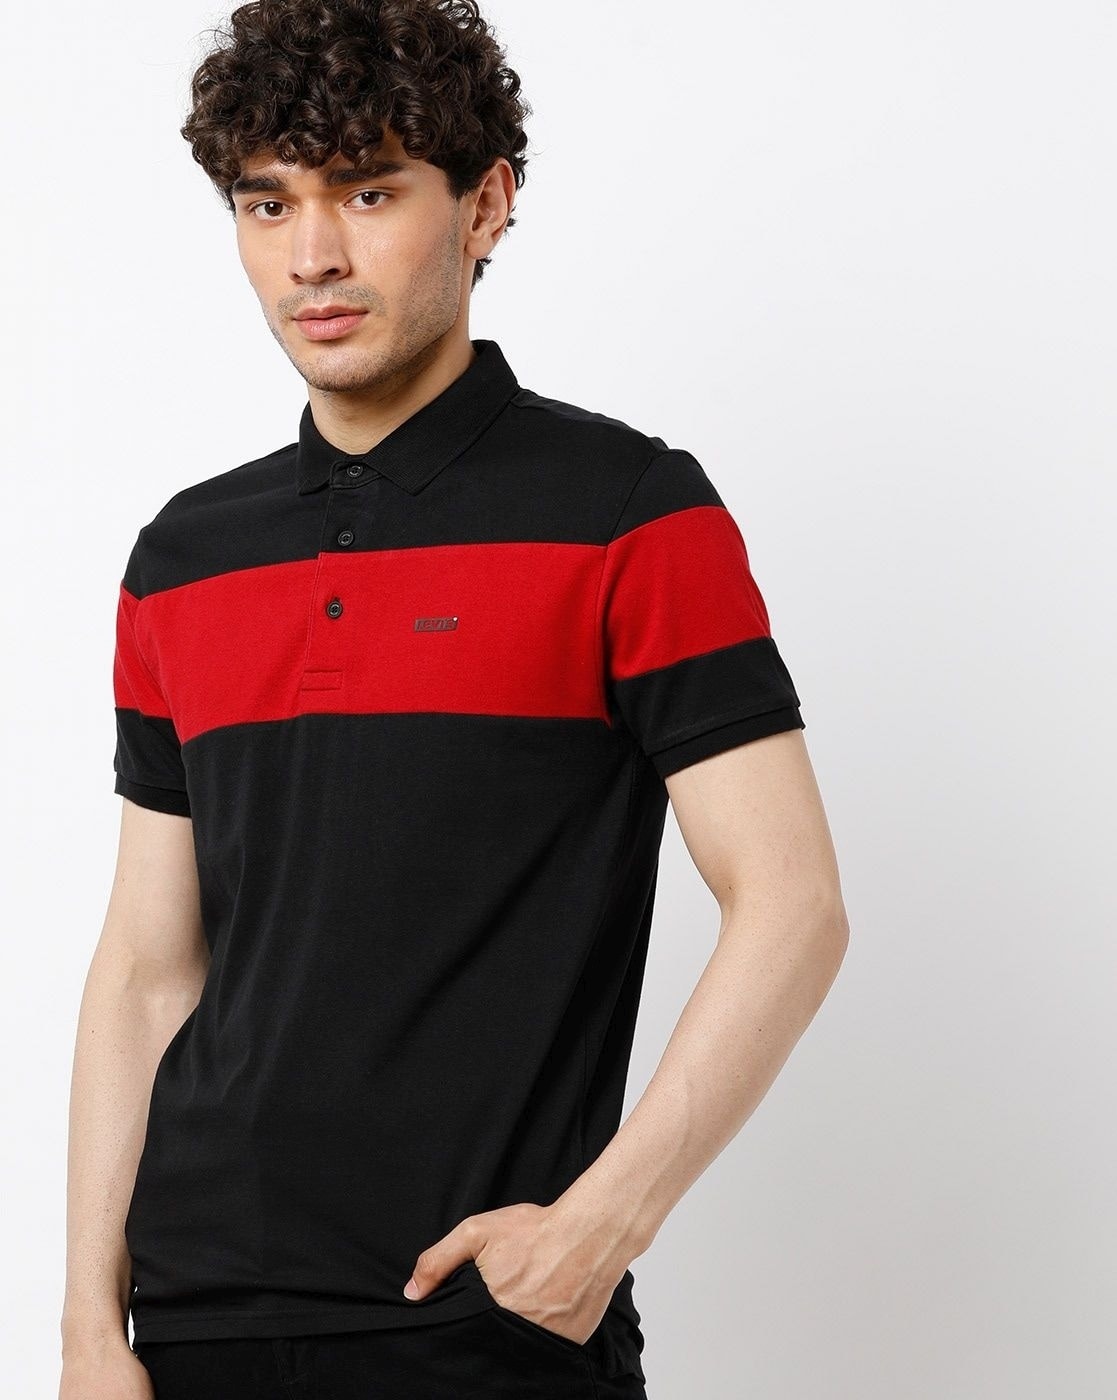 levis black and red t shirt